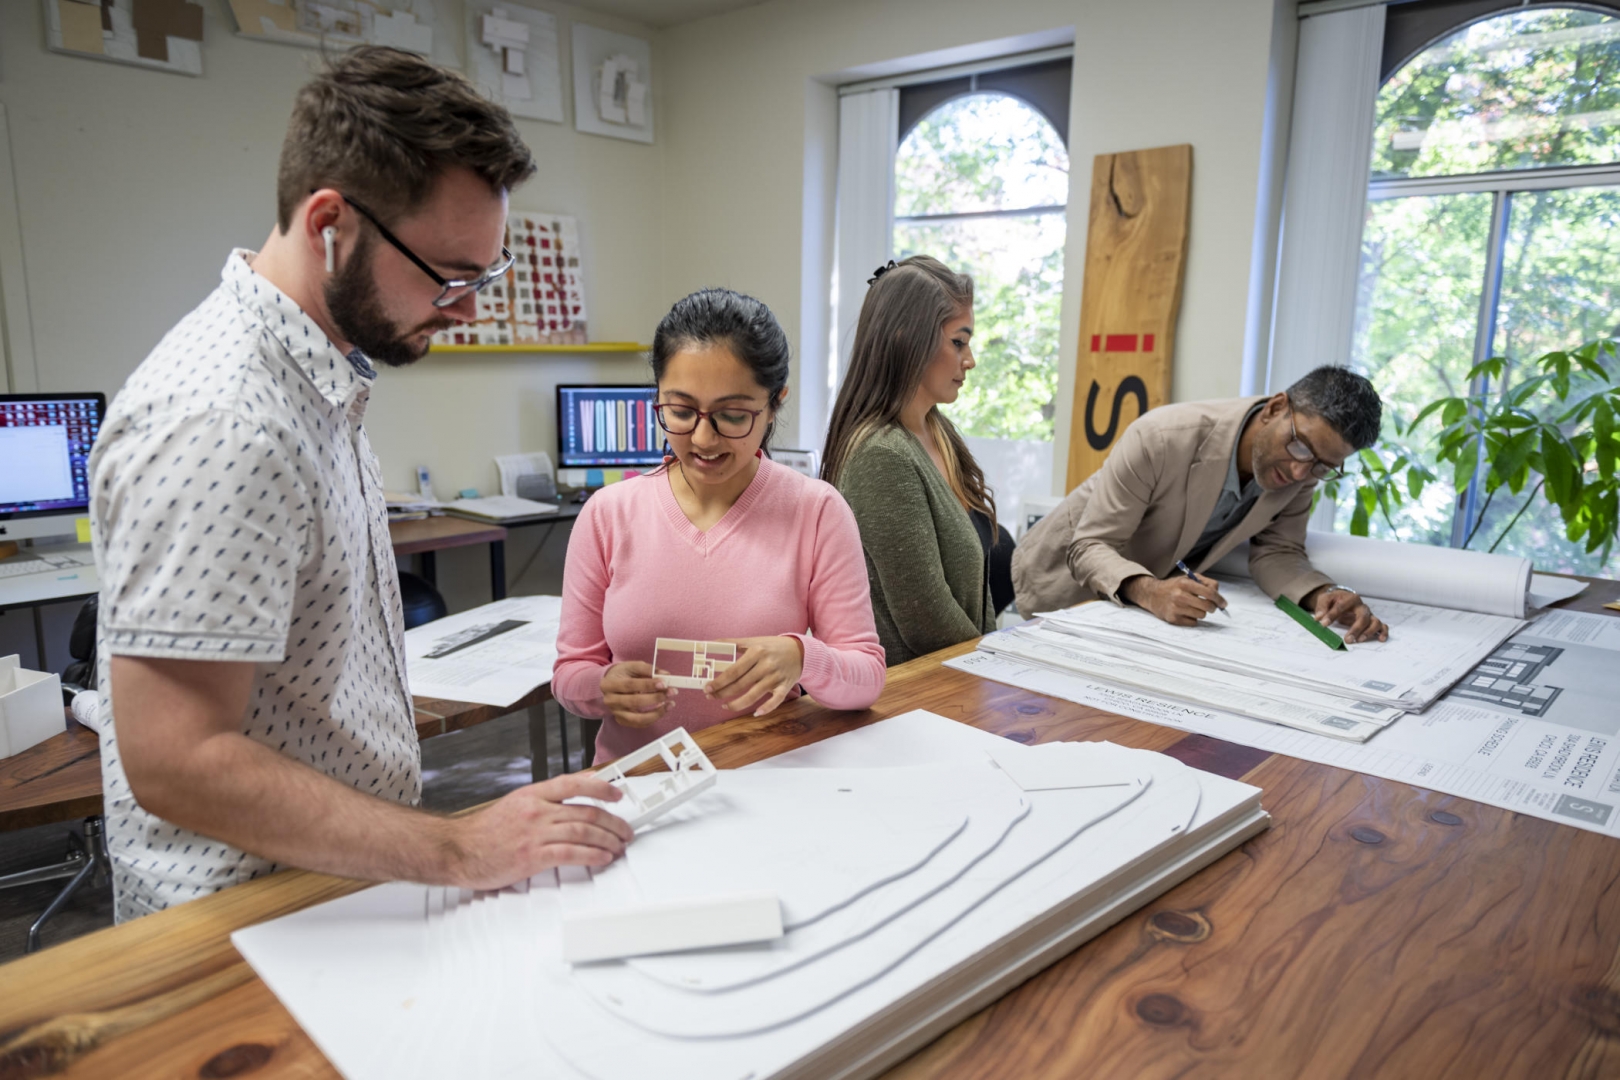 Two students stand at a long table to discuss 3-D mockups of houses while another student and Rouben Mohiuddin review paper designs nearby.